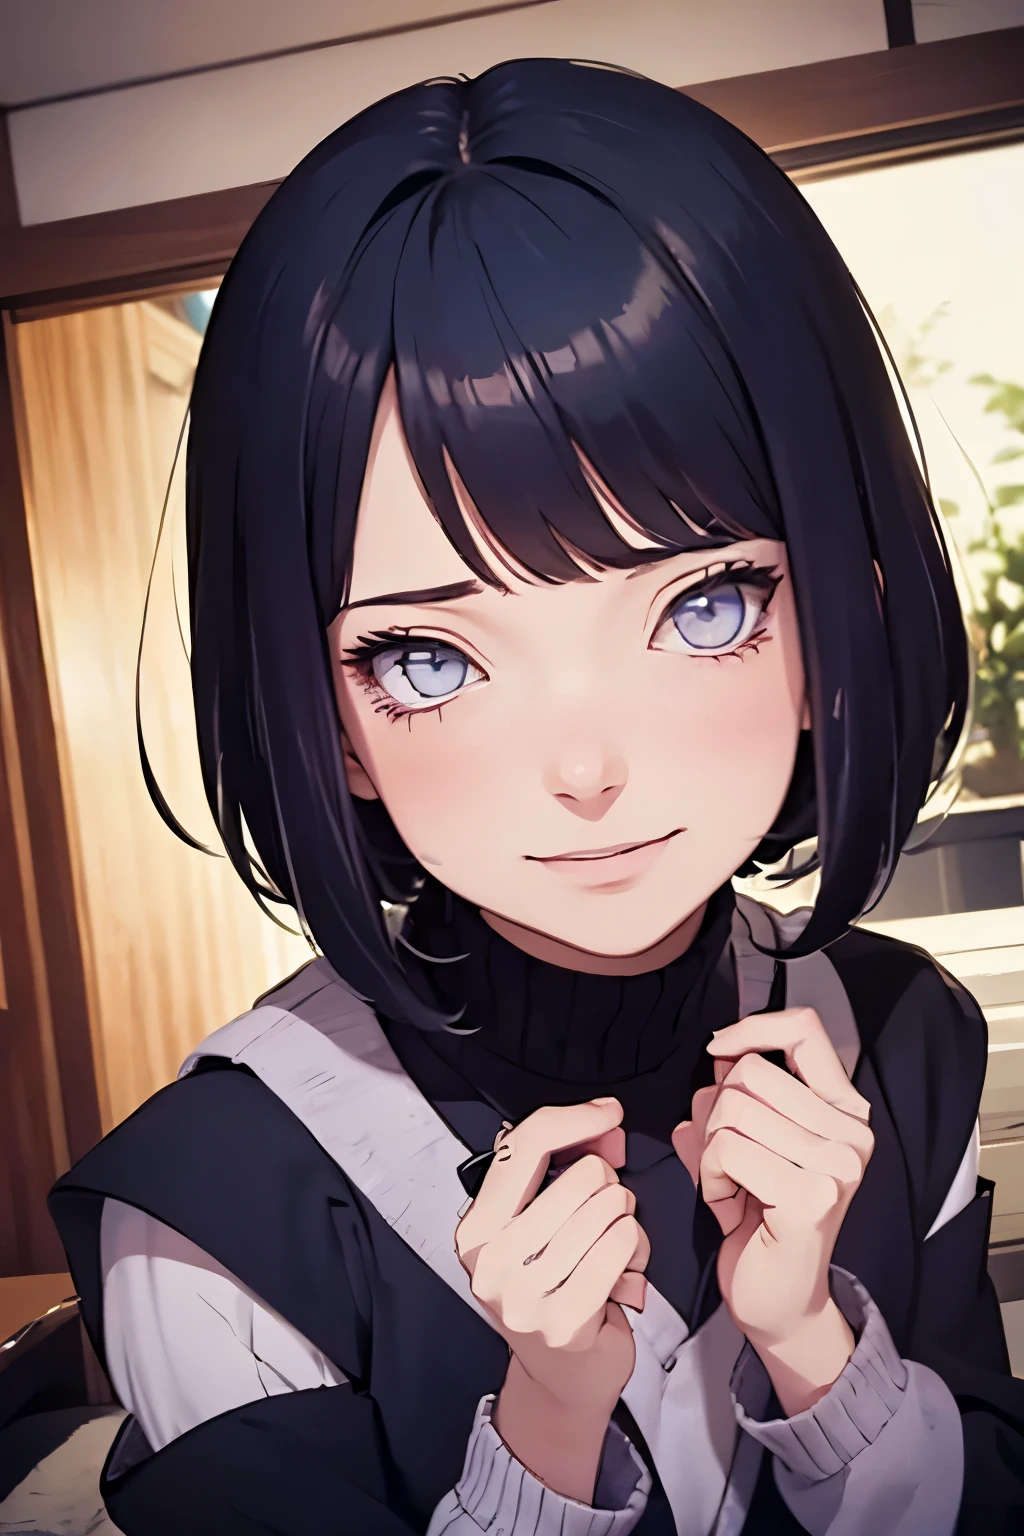 2d, _todler_, {{6 years old}}, RPG character in Naruto alternative universe by Masashi Kishimoto, specially in hyuga clan; Appearance base is Wraith from Apex Legends, with byakugan-soft lilac eyes, kind and soft expression making her look swwet; joyfull, short and dark hair (with shades of dark blue); artwork in modern Japanese animation style, 8k high definition quality, masterpiece, {{high detailed eyes}}, grain filter, high resolution, extremely detailed, portrait, Anatomically accurate, girly reddish cheeks; (highest quality:1.3), {{dutch angle}}, {{smiling todler}}, {{inocent}} ((byakugan)), ((child)), soft expression, kind expression
